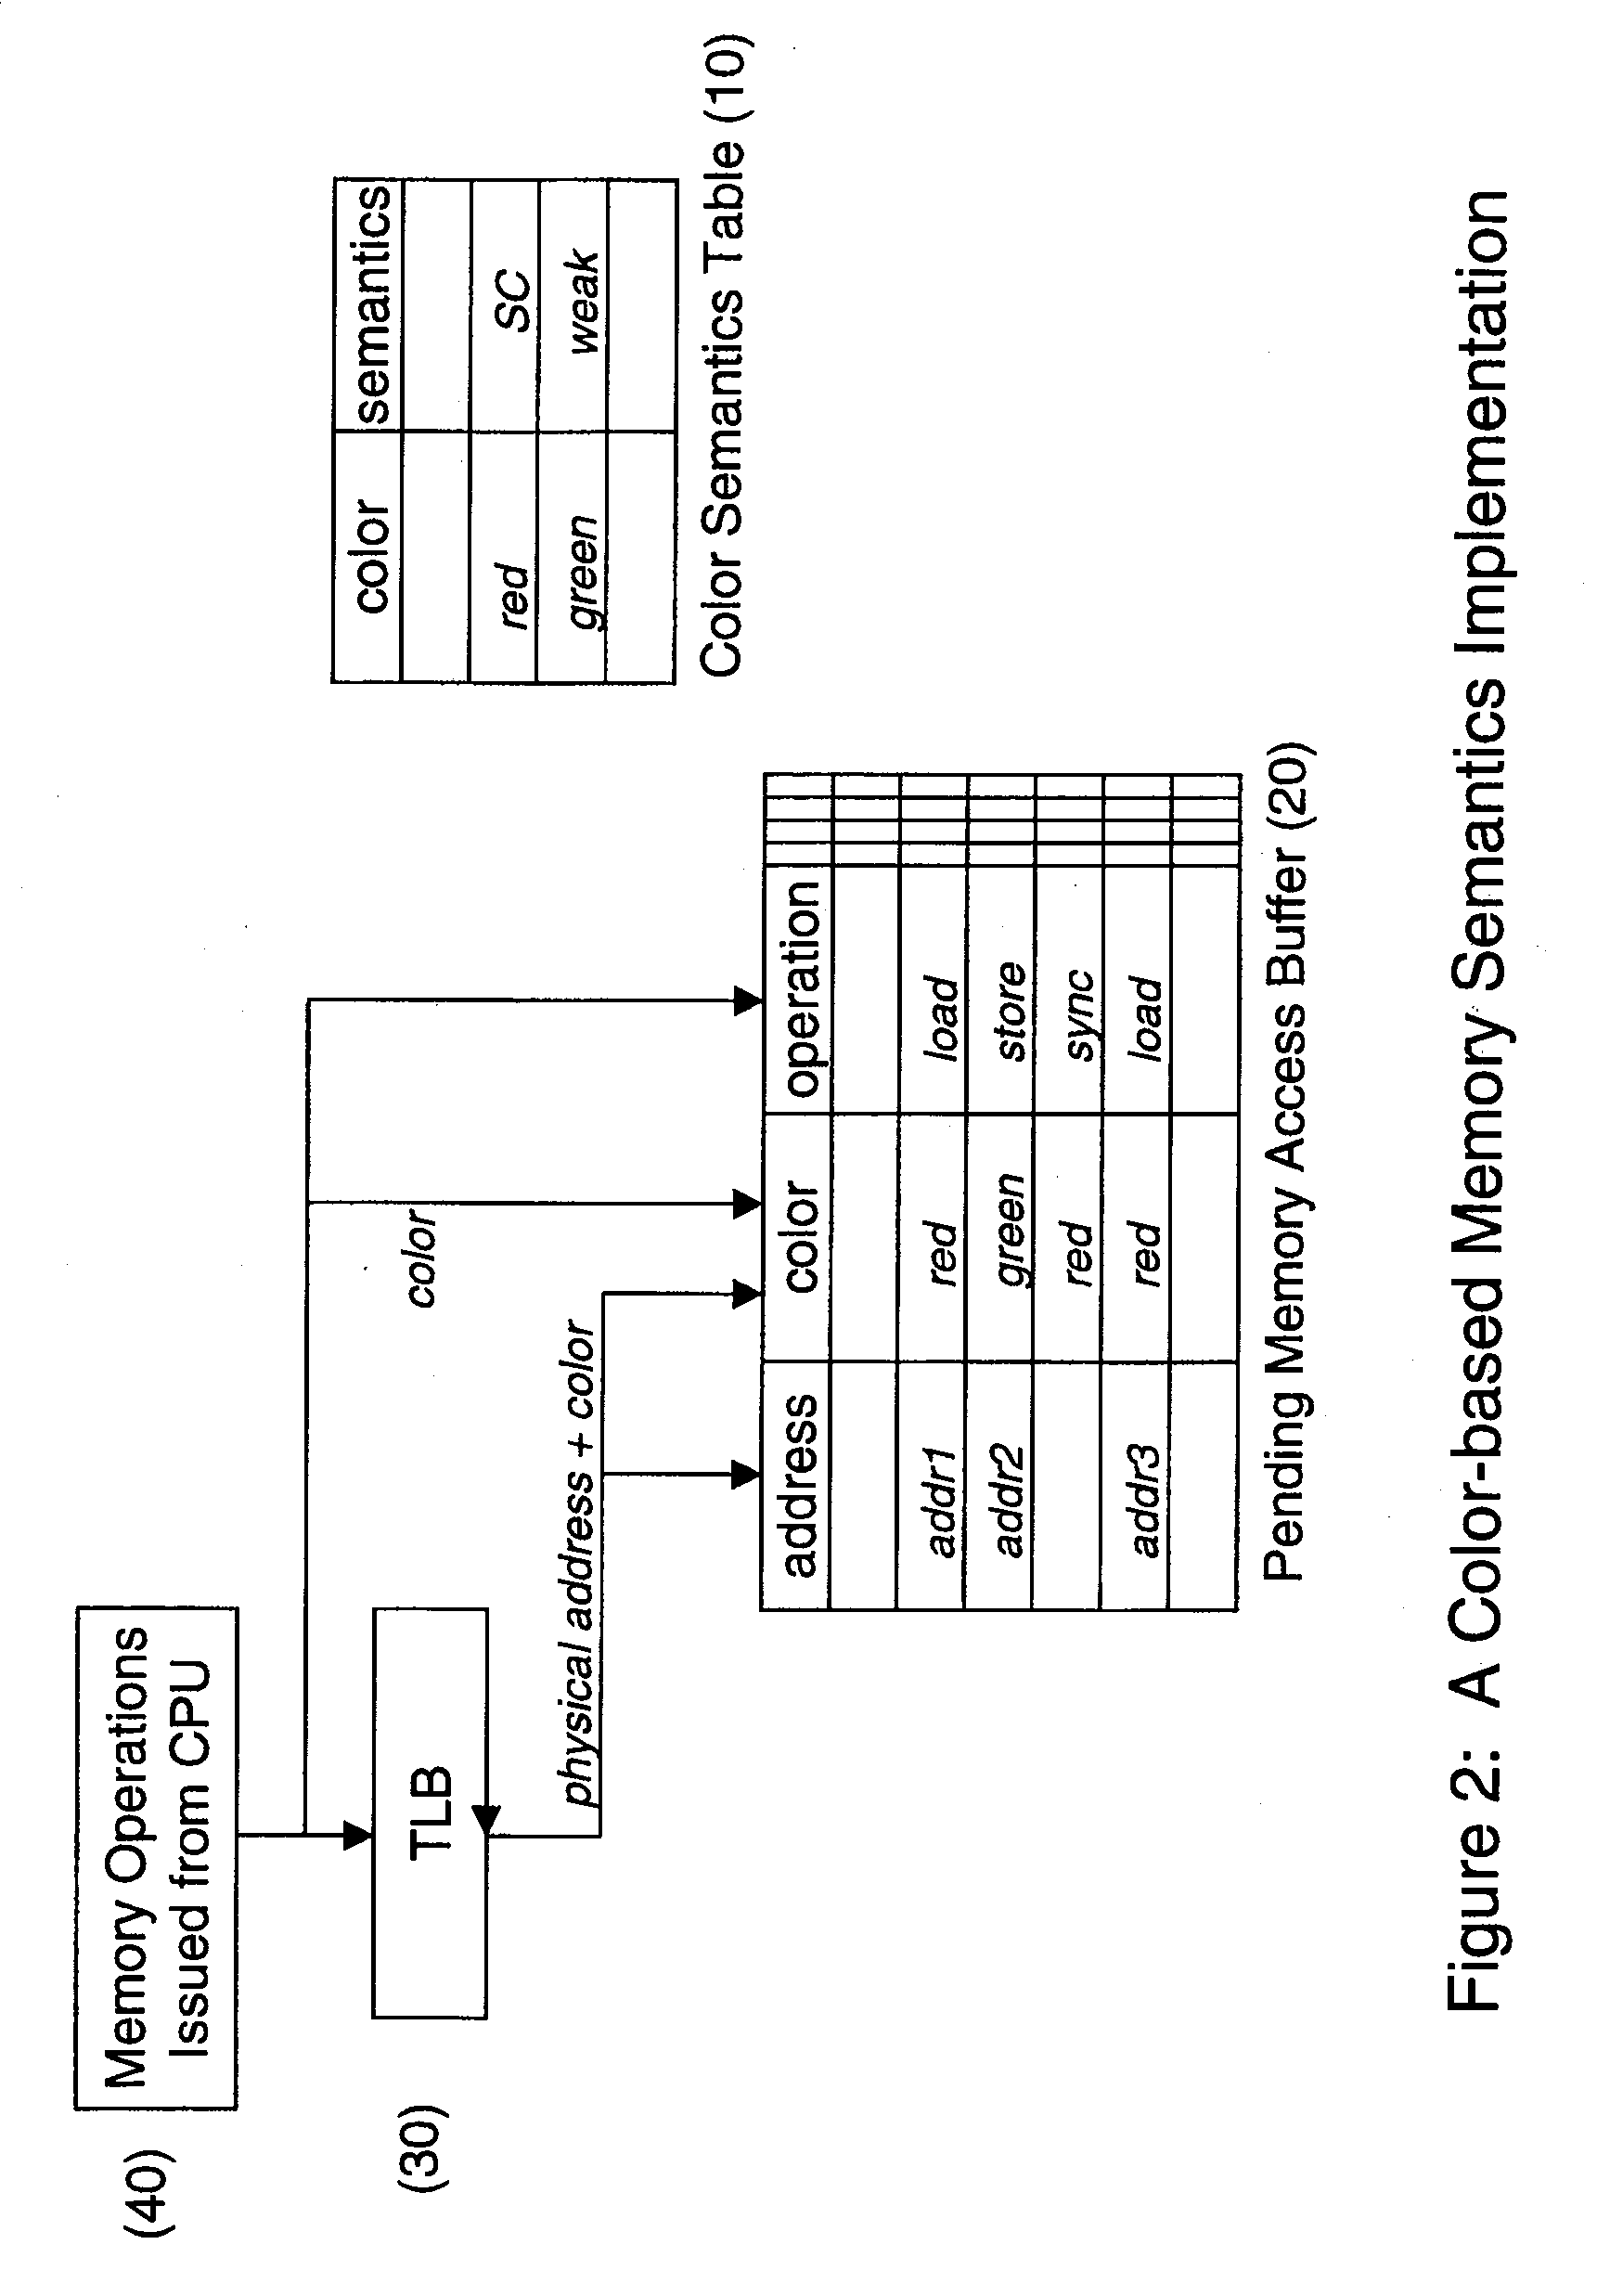 Architecture support of memory access coloring